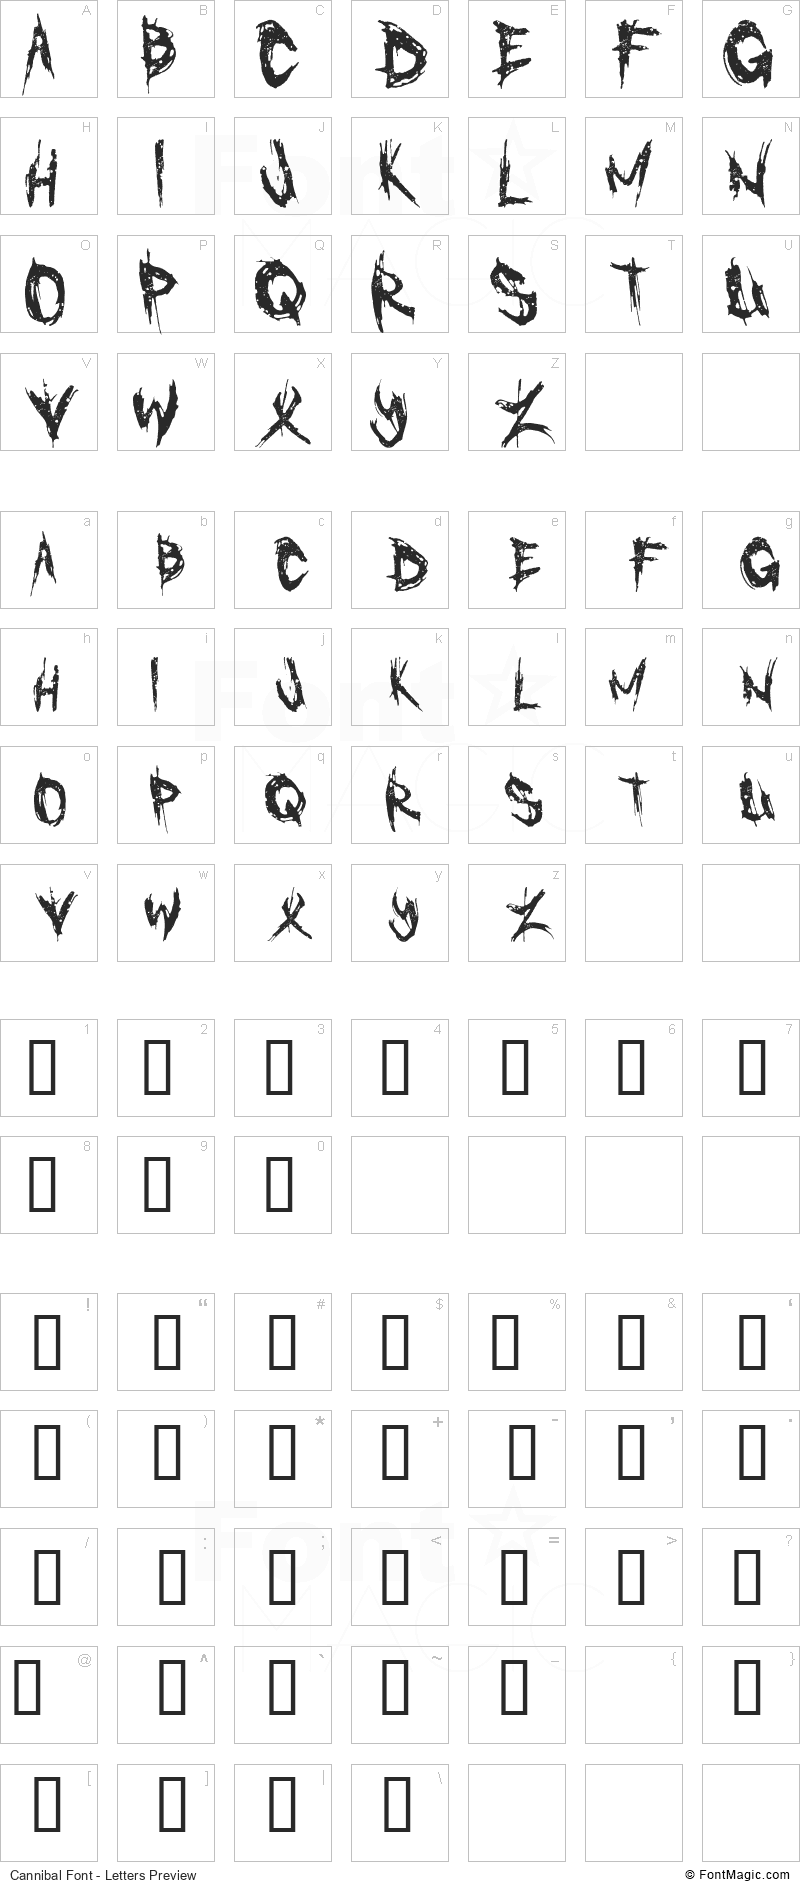 Cannibal Font - All Latters Preview Chart